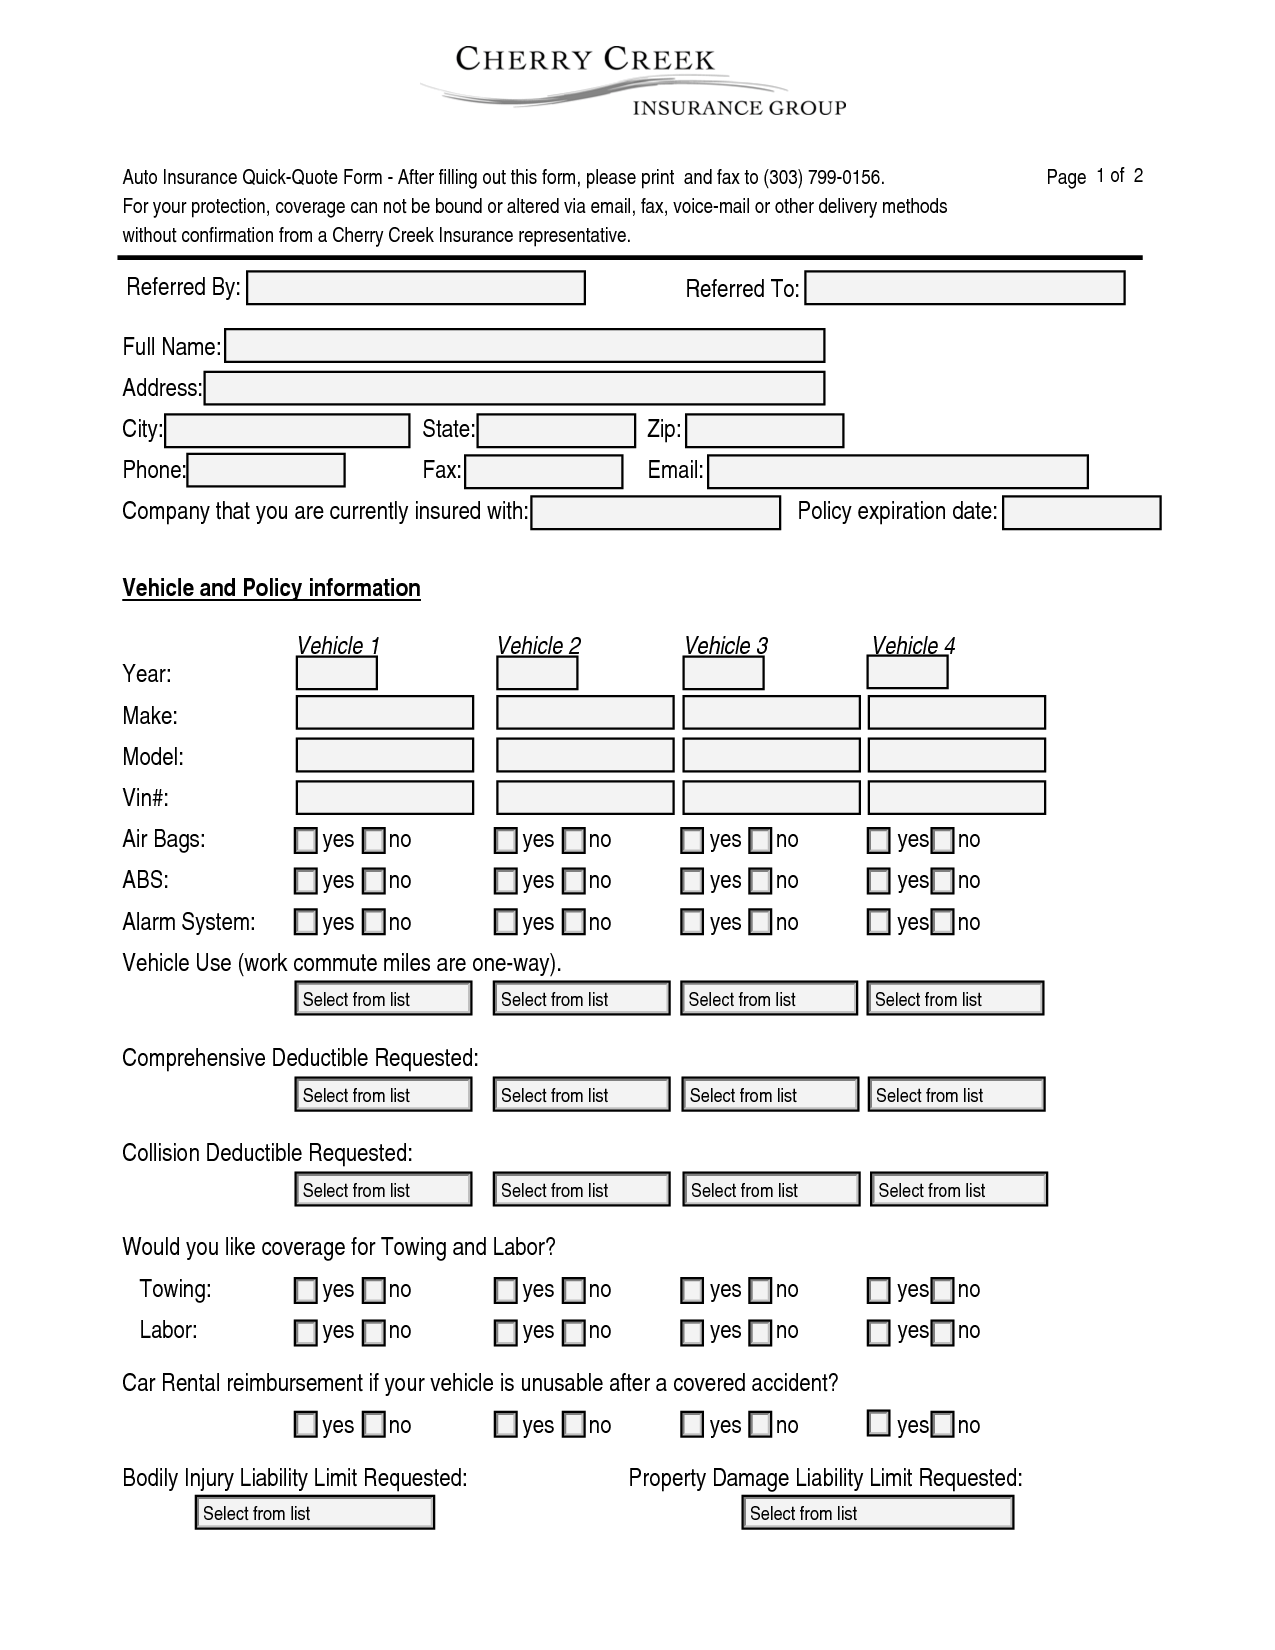 Life Insurance Quote Form 05